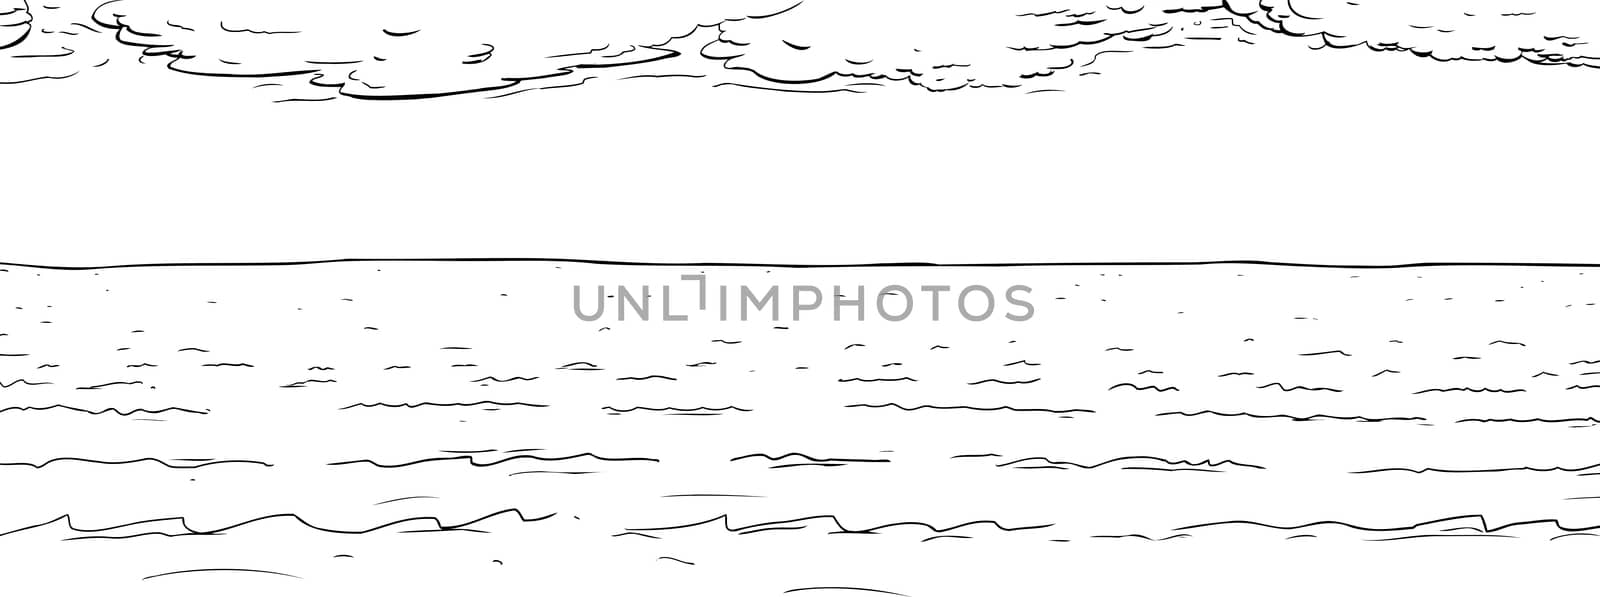 Background outline illustration of wide ocean water surface